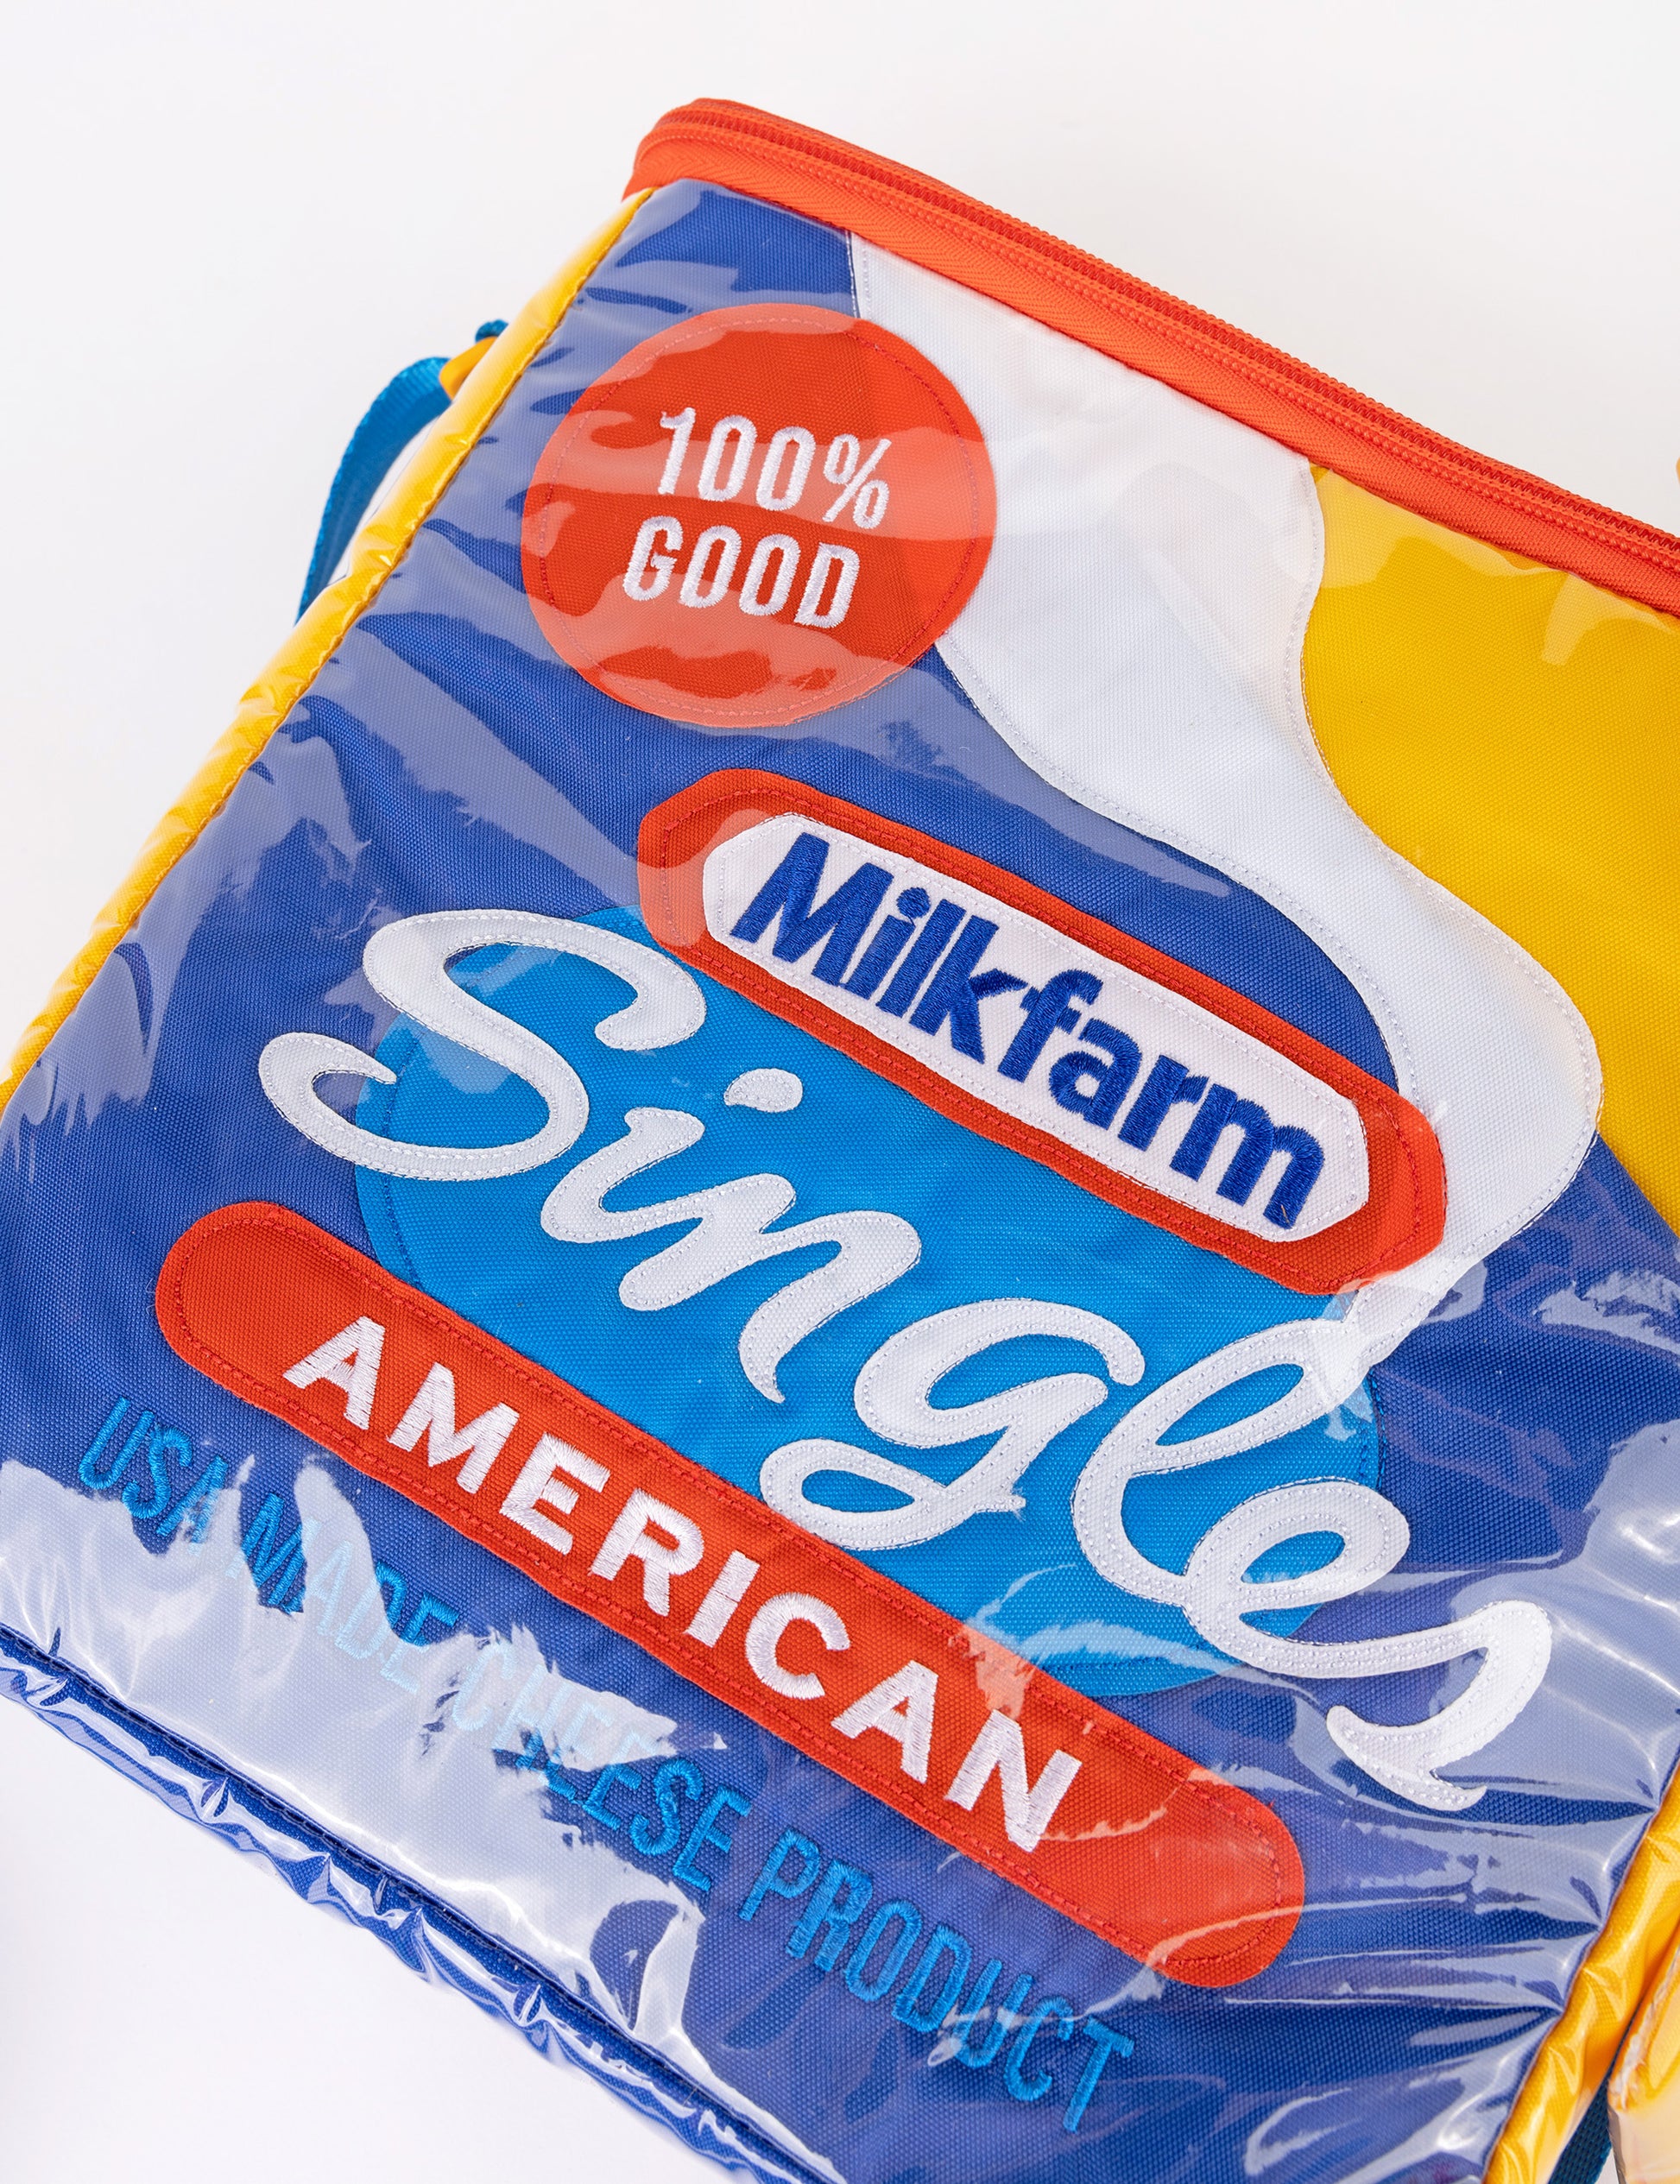 Milkfarm Singles Cheese Bag that looks like a Kraft Singles package. Multicolored with blue, white, red and mustard coloring. Text also says "100% Good/ American/ USA Made Cheese Product."